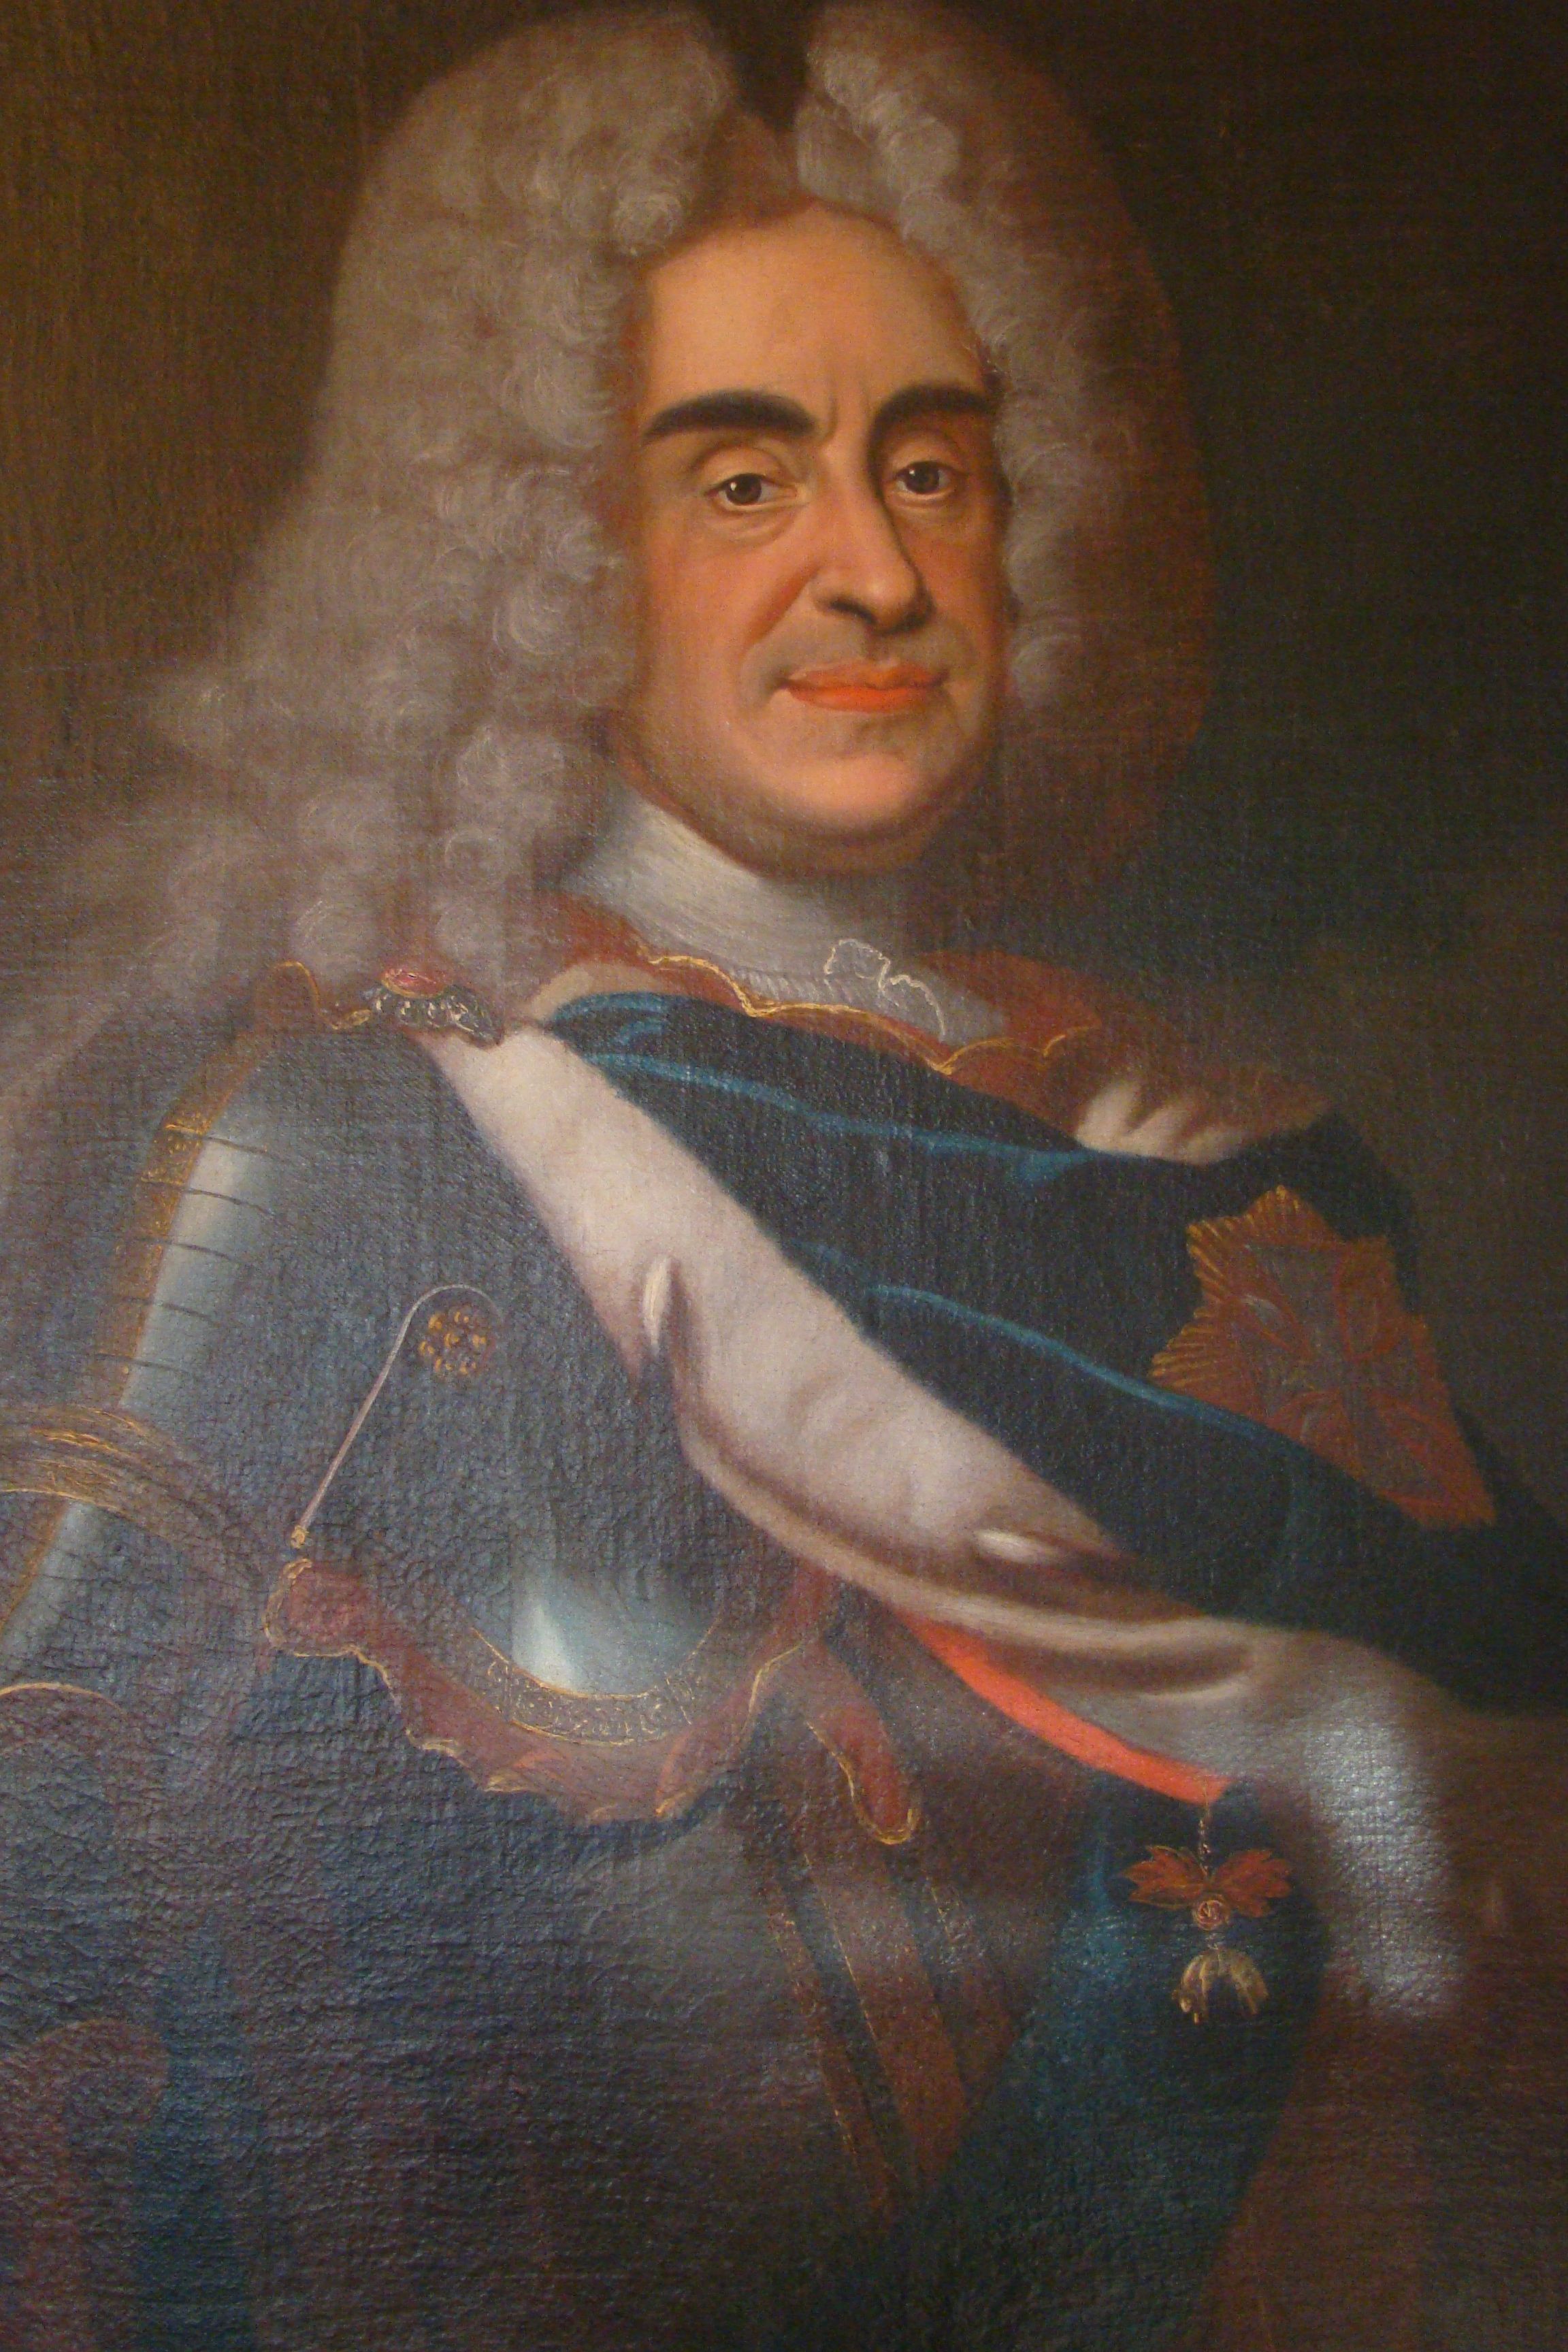 Portrait of King August II the Strong at Stolpen Castle, author unknown, 18th century.